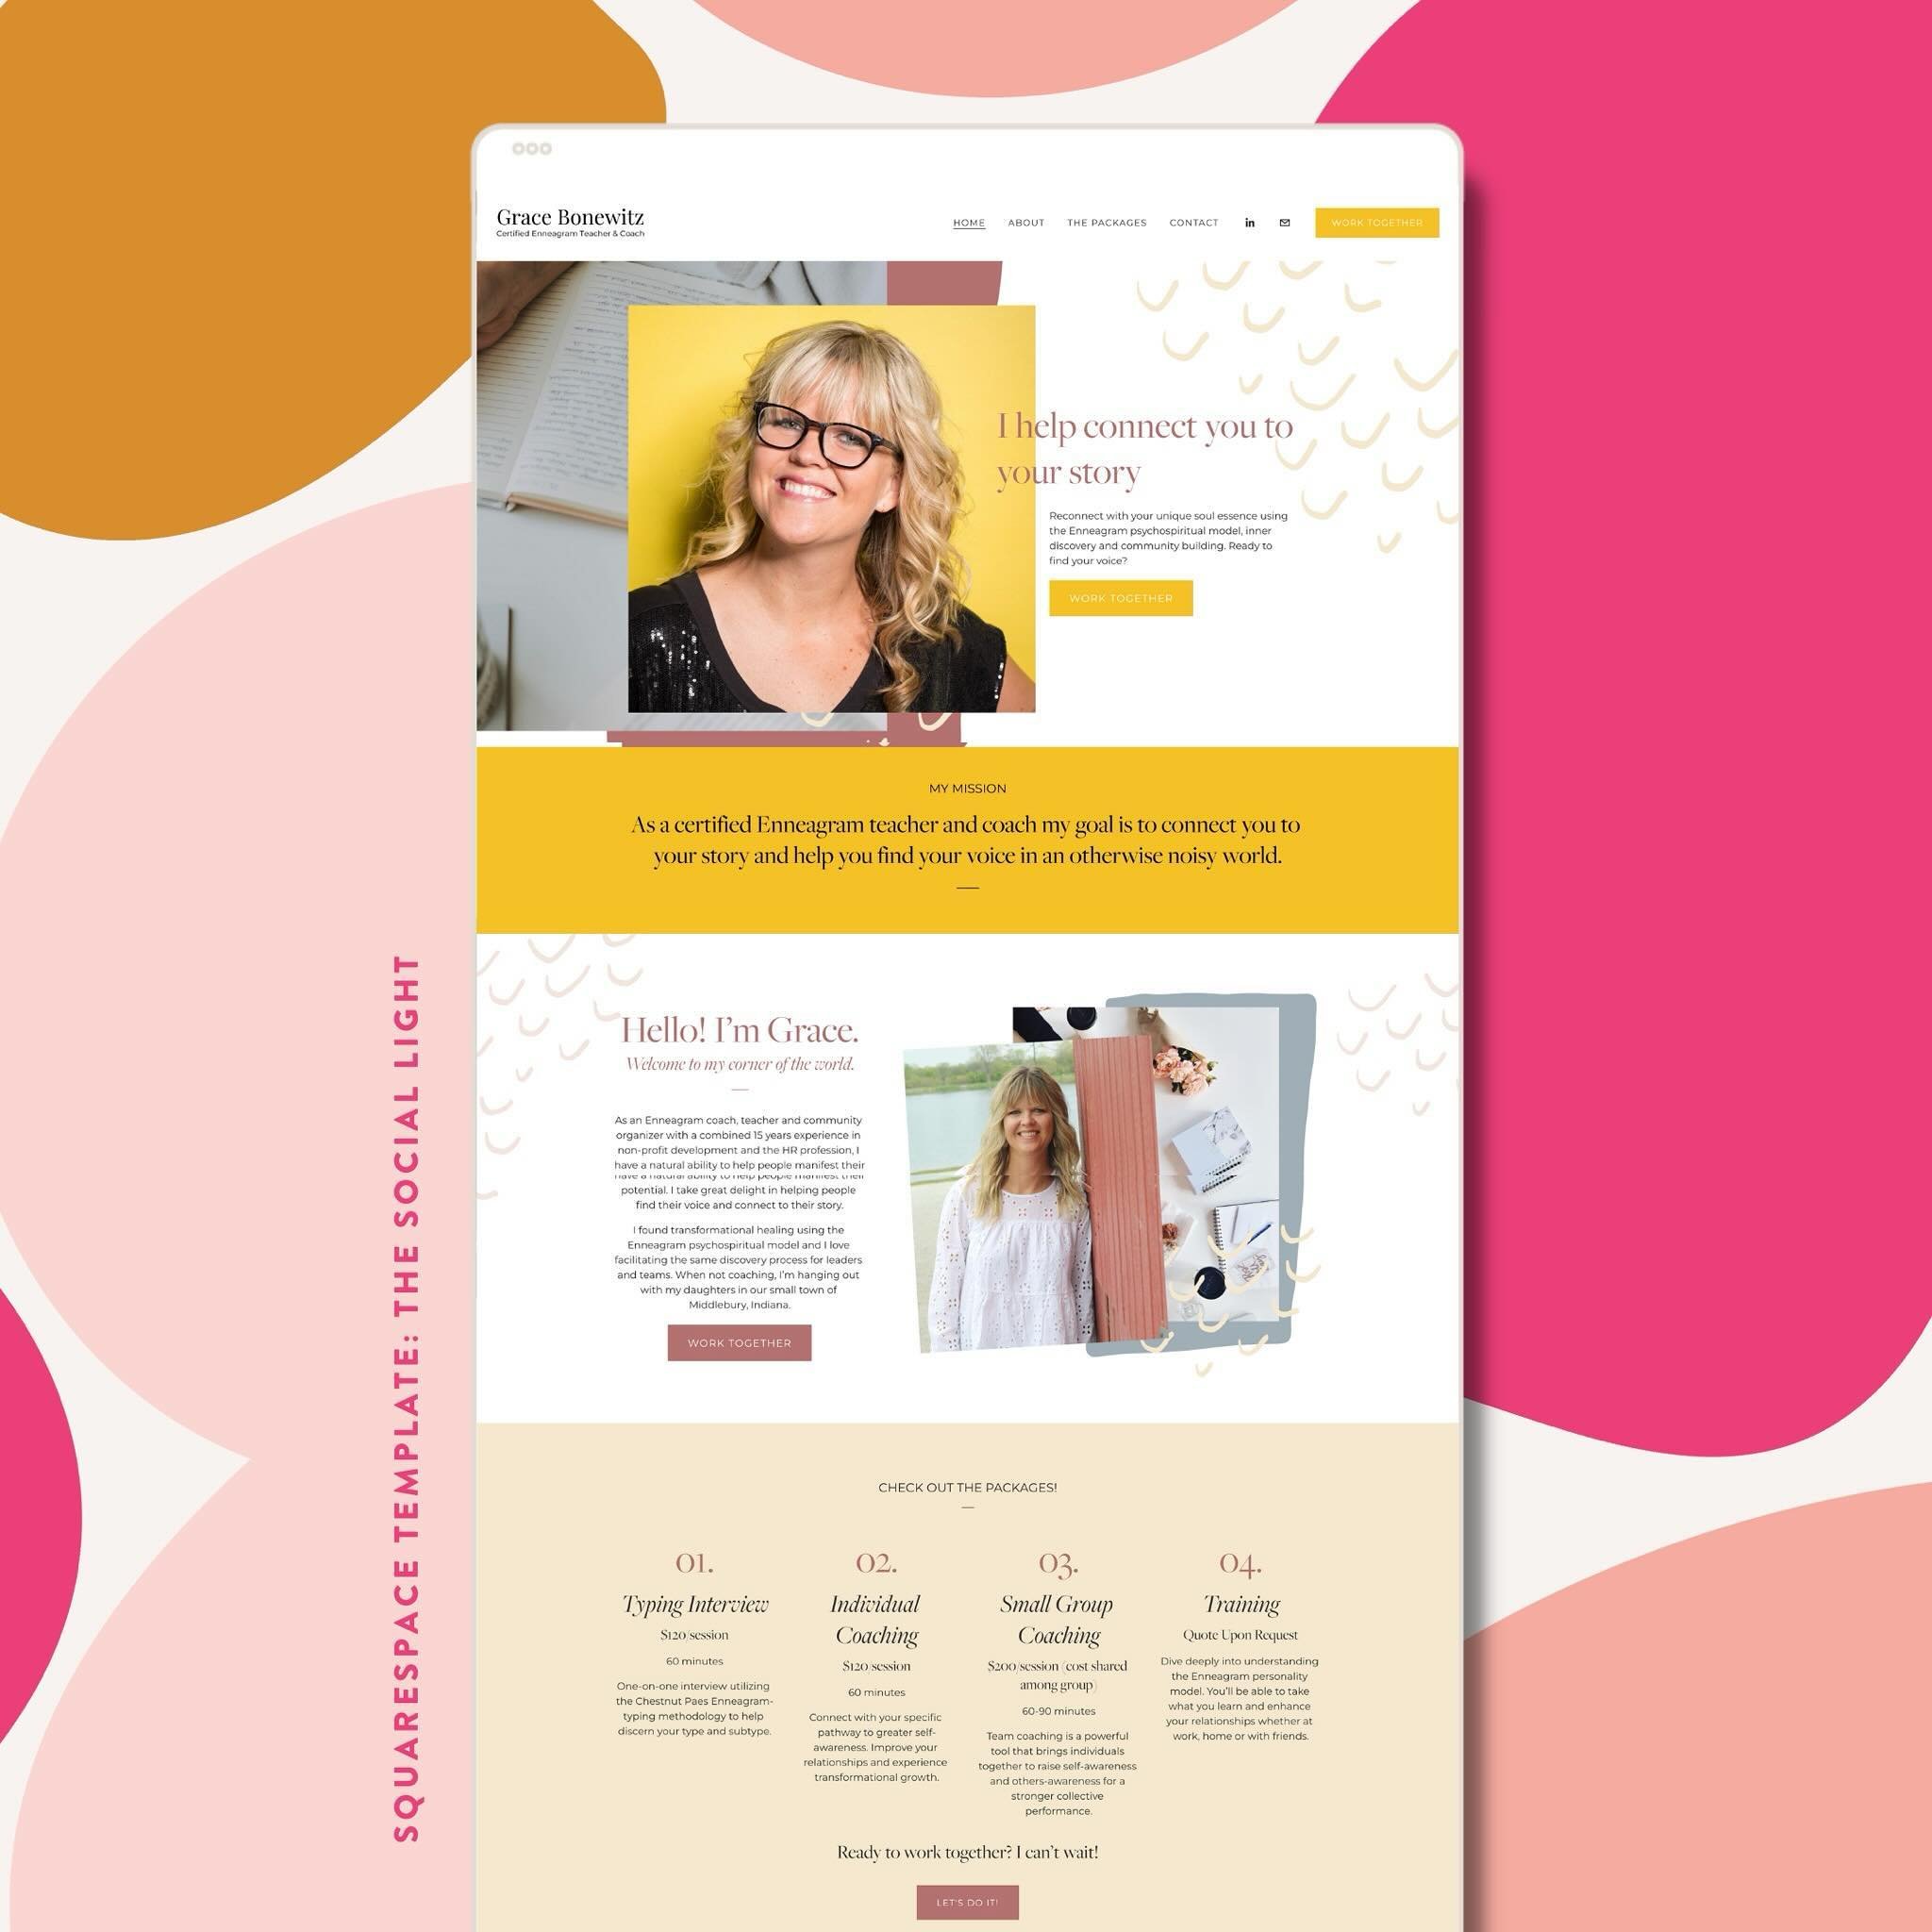 👀 GET A LOOK! 👀 My Squarespace template &mdash; the Social Light &mdash; can come to life with your colors🎨 + your images 📸 + your brand✨!!!

👉🏻 If you (or your entrepreneur bestie) have been looking for a sign to revamp that boring old website